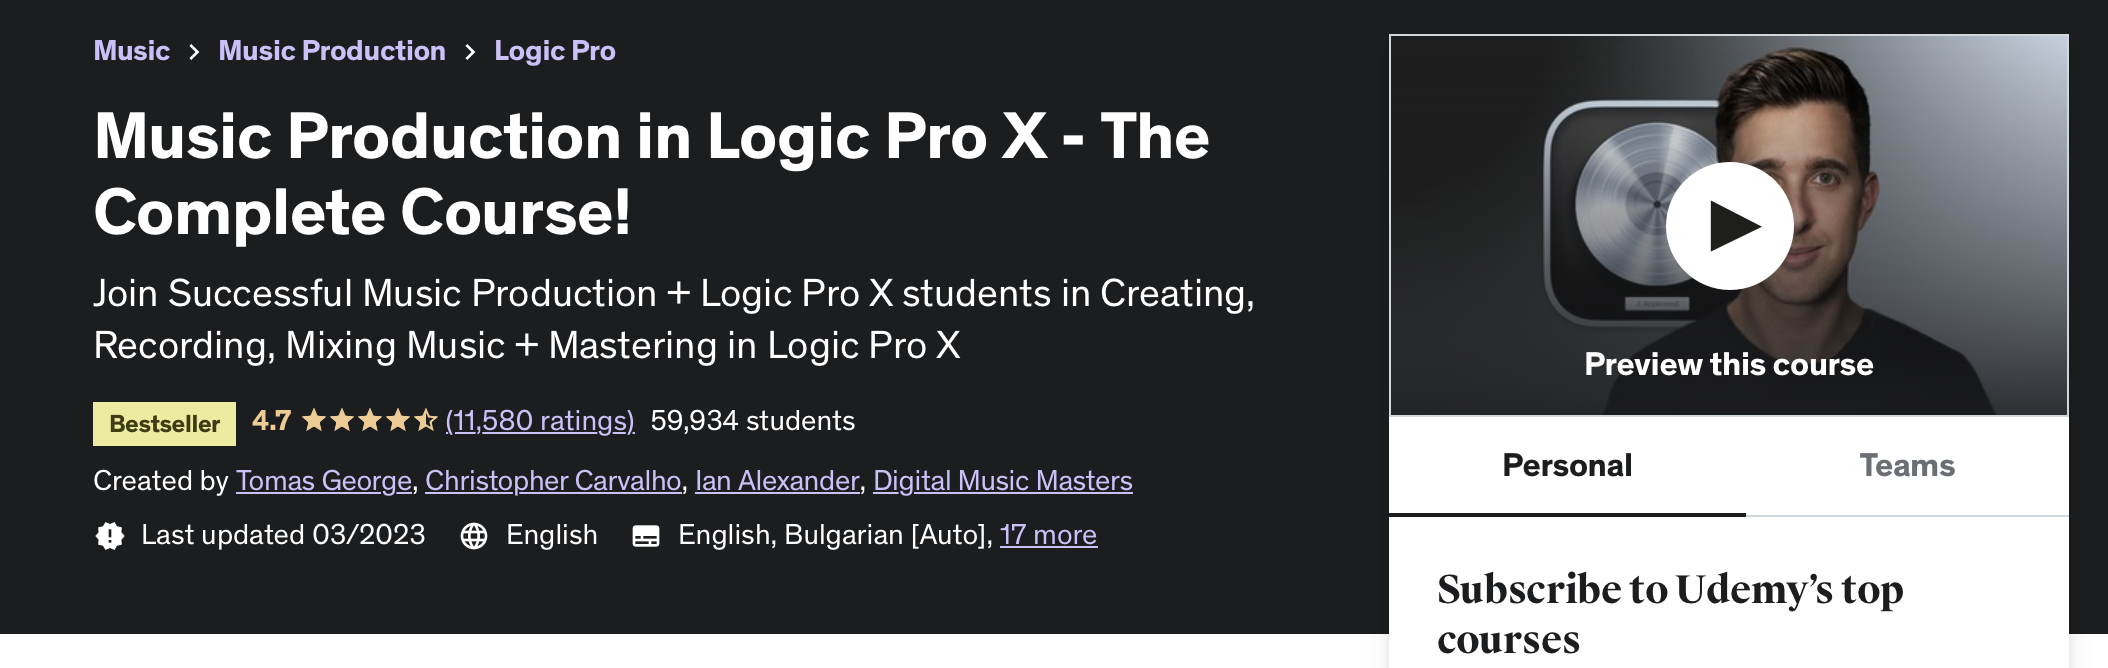 Music Production in Logic Pro X - The Complete Course! 